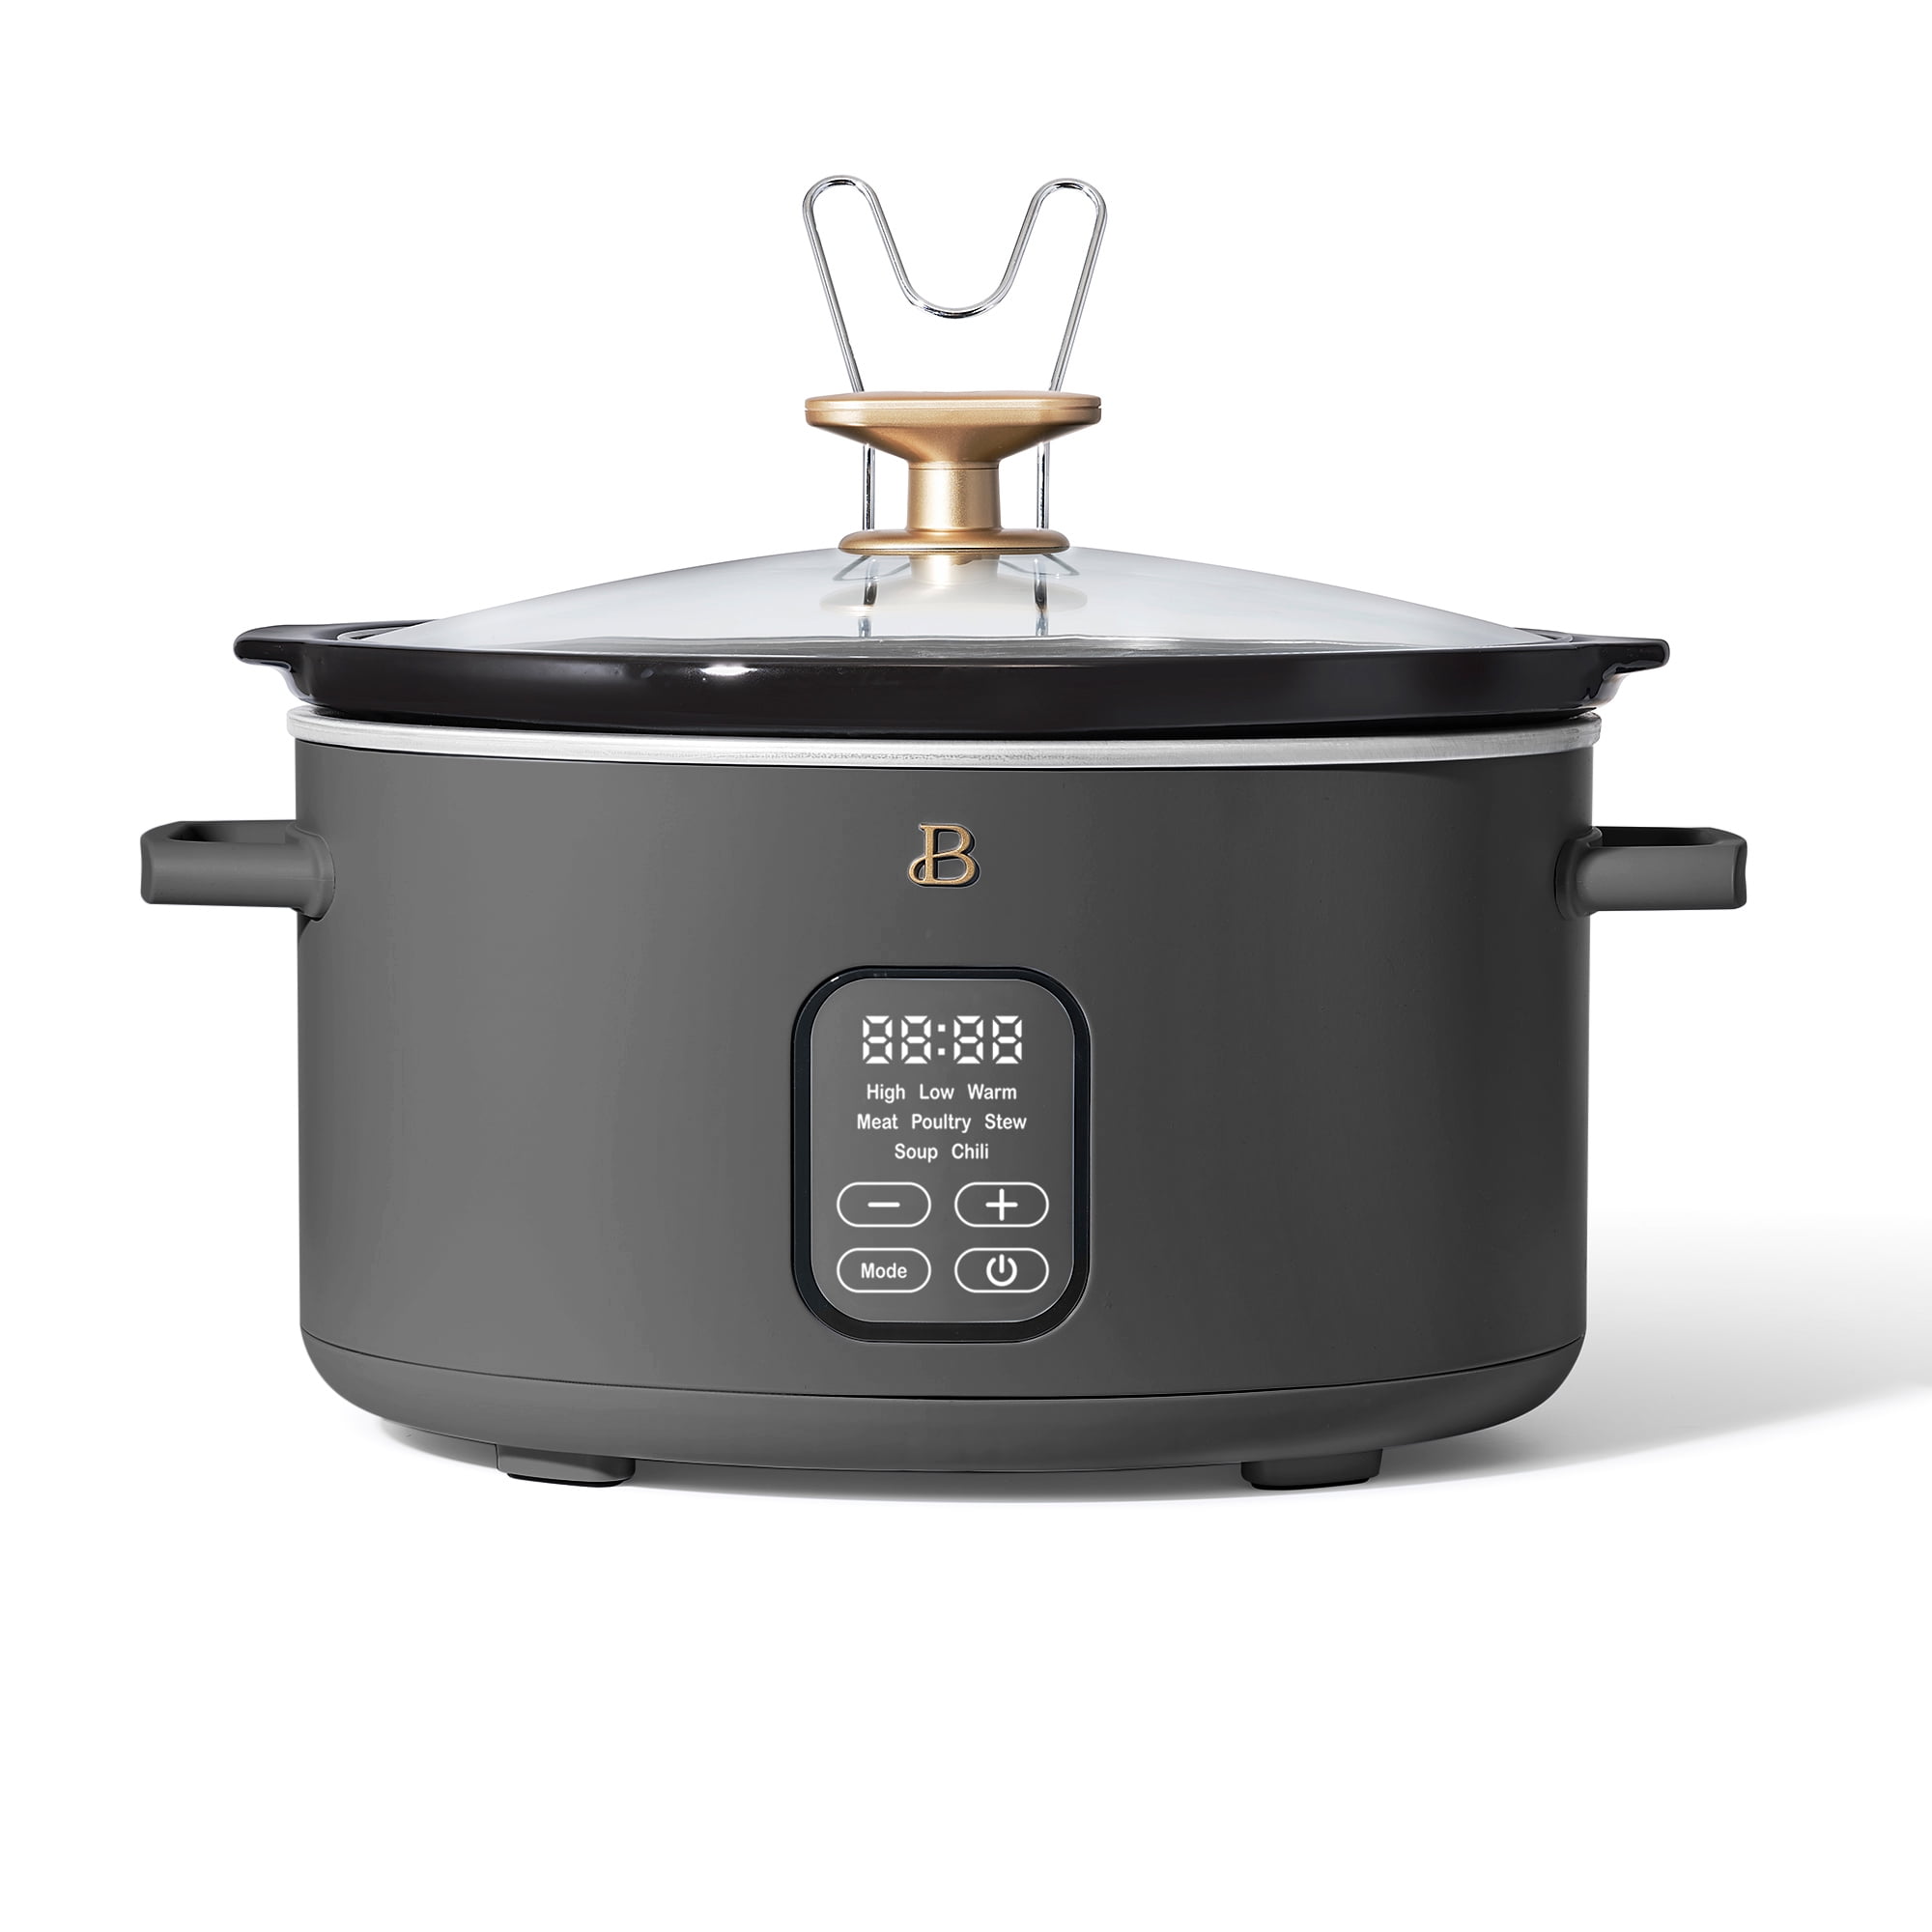 Beautiful 6 Quart Programmable Slow Cooker, Oyster Grey by Drew Barrymore